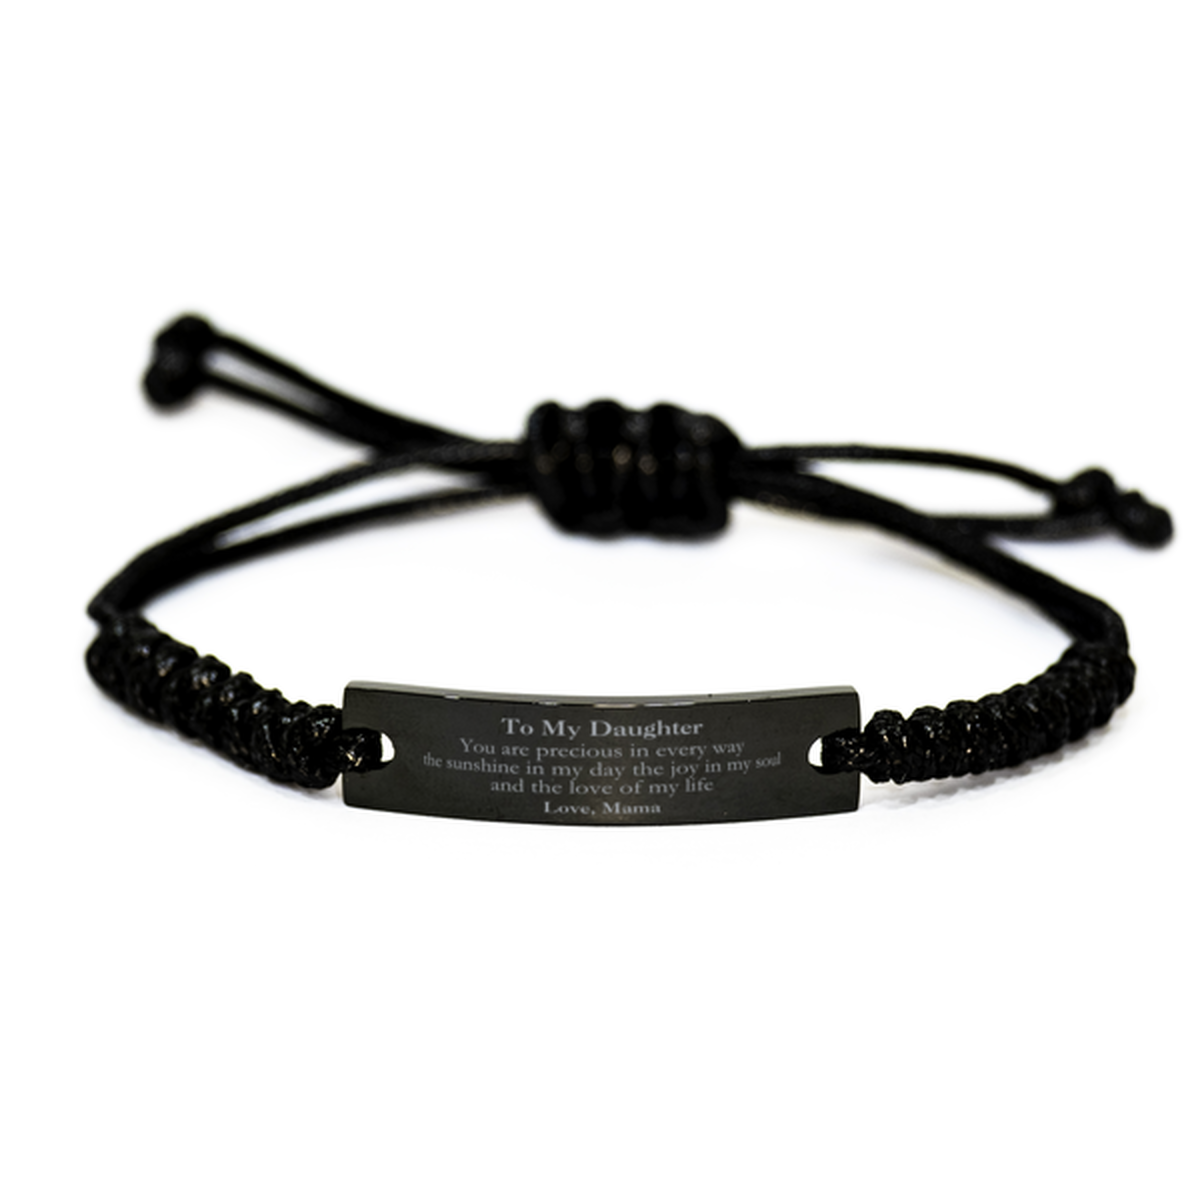 Graduation Gifts for Daughter Black Rope Bracelet Present from Mama, Christmas Daughter Birthday Gifts Daughter You are precious in every way the sunshine in my day. Love, Mama